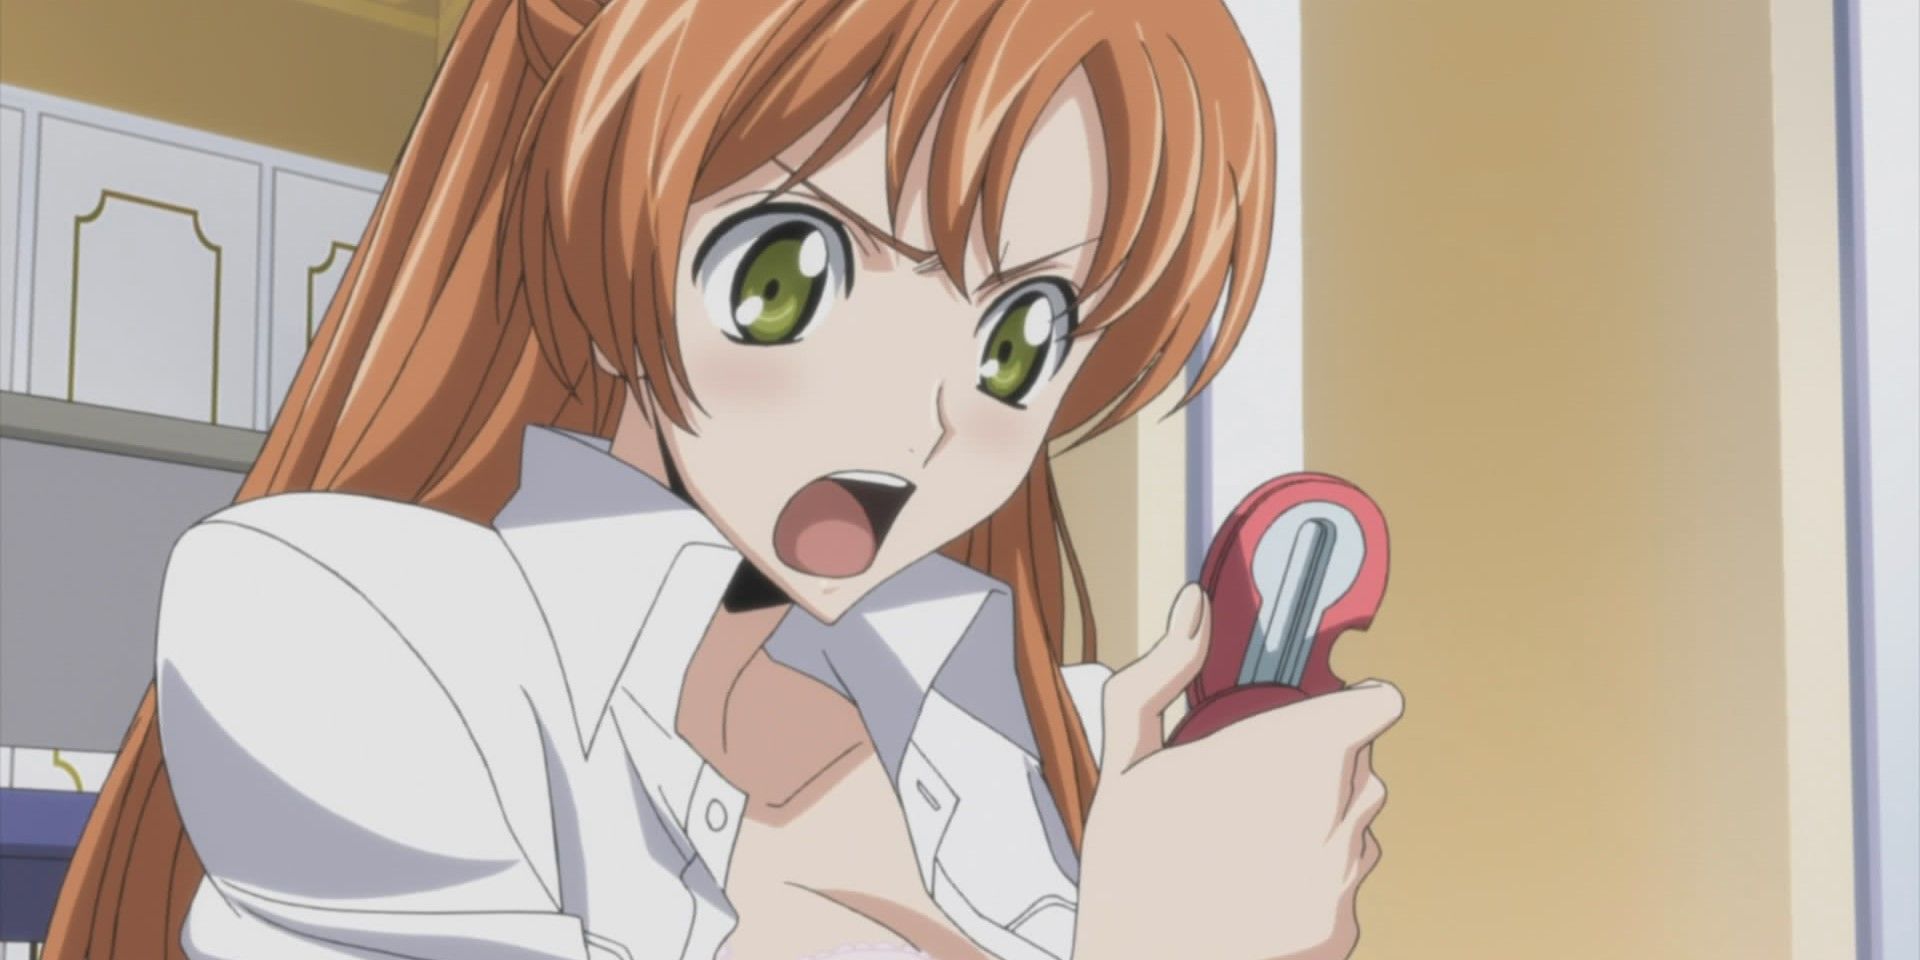 Shirley mad over Lelouch hanging up her phone.